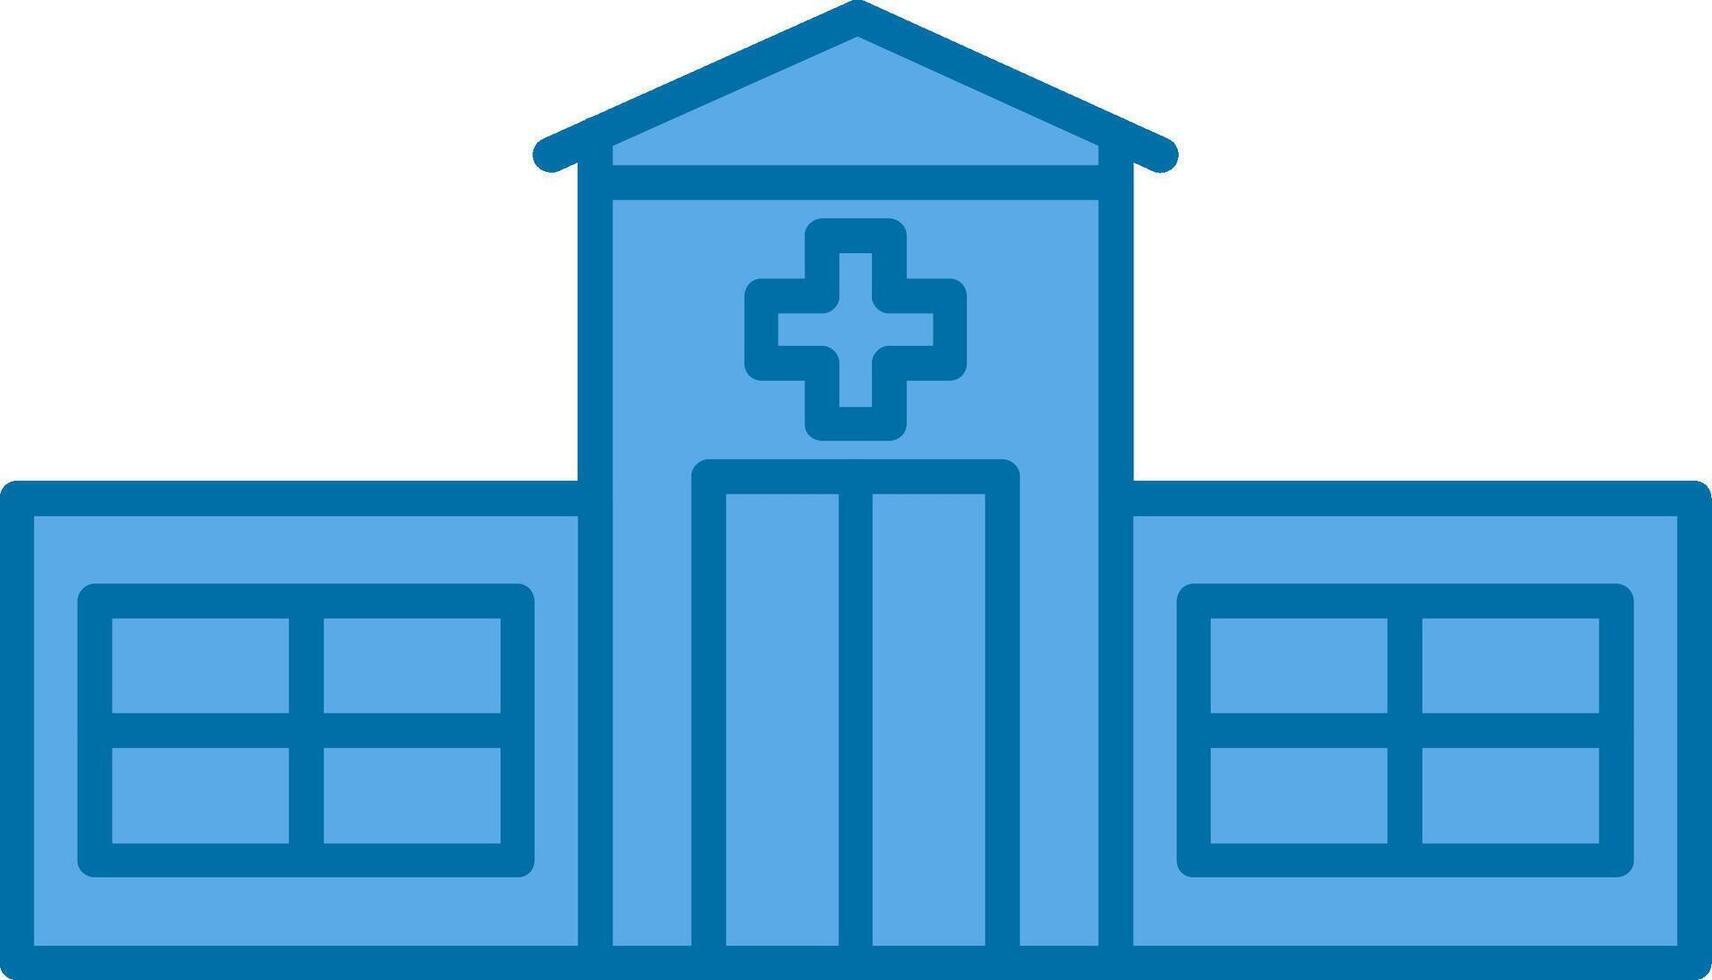 Emergency Room Filled Blue  Icon vector